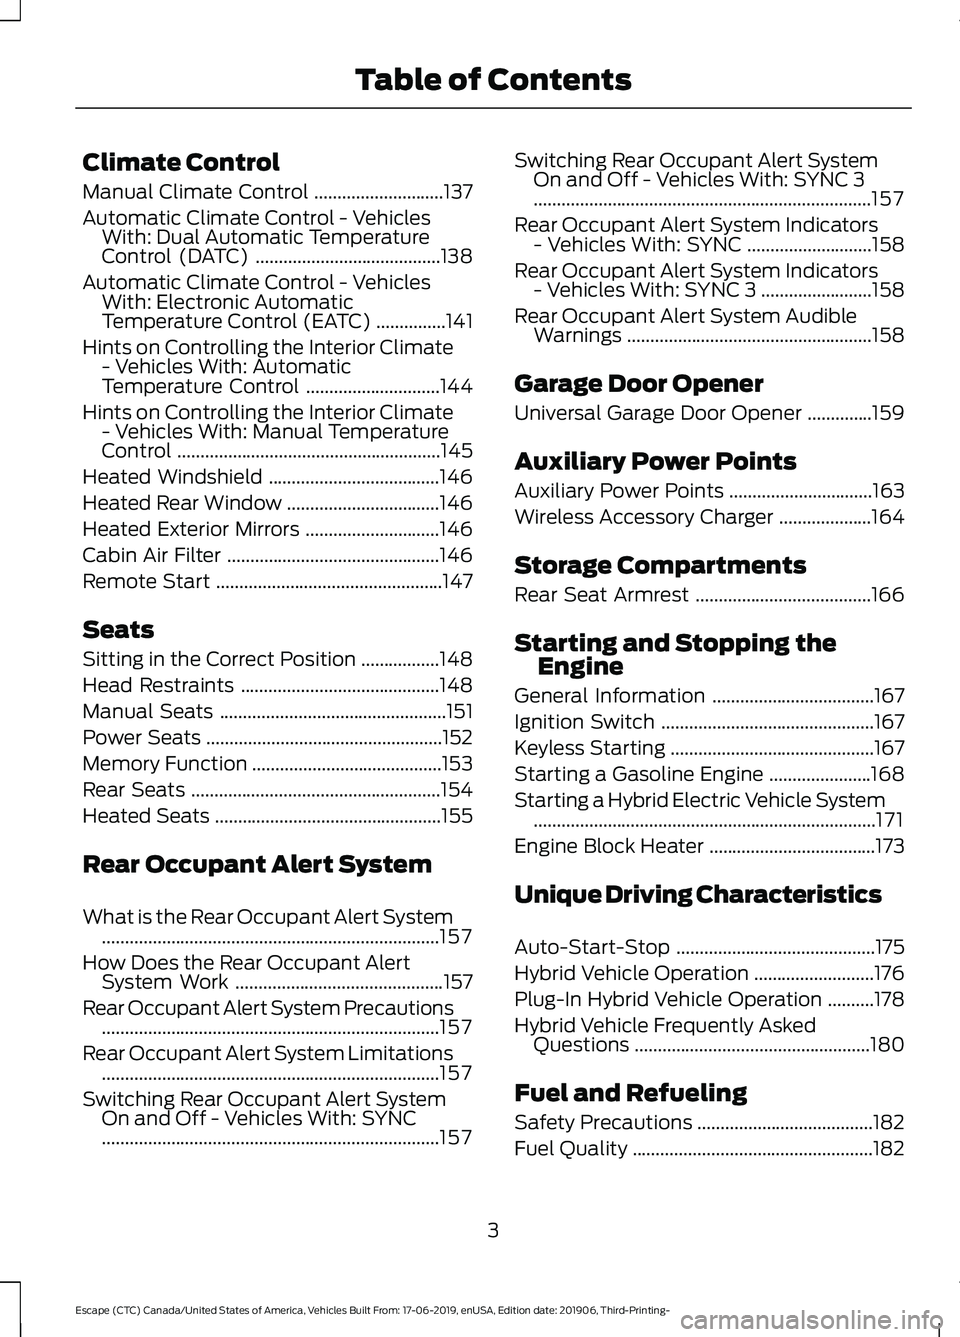 FORD ESCAPE 2020  Owners Manual Climate Control
Manual Climate Control
............................137
Automatic Climate Control - Vehicles With: Dual Automatic Temperature
Control (DATC) ........................................
138